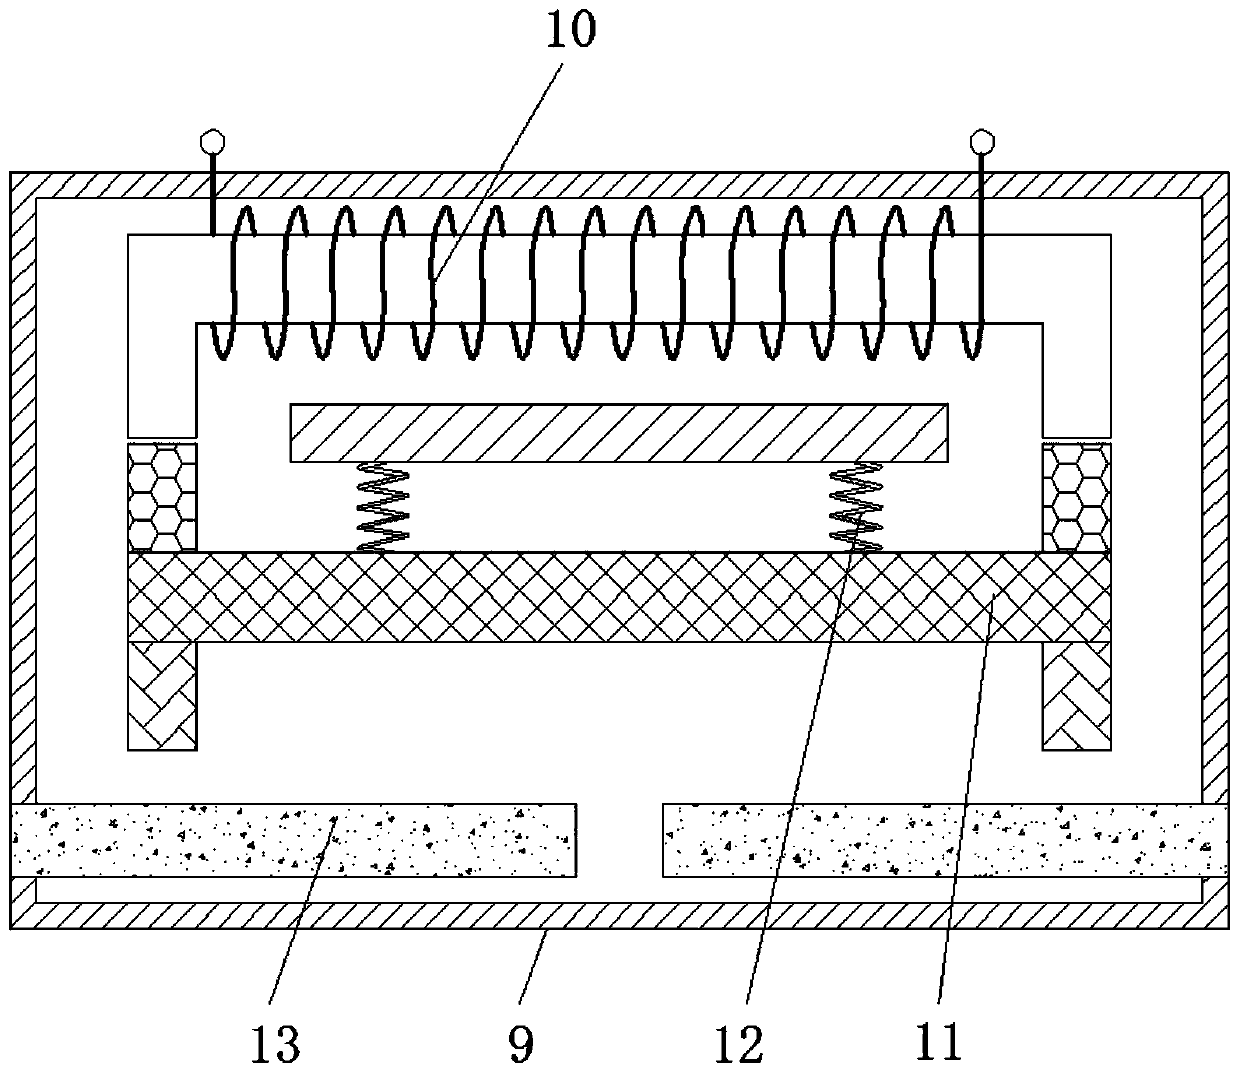 Hard disk fixing device based on electromagnetic induction principle